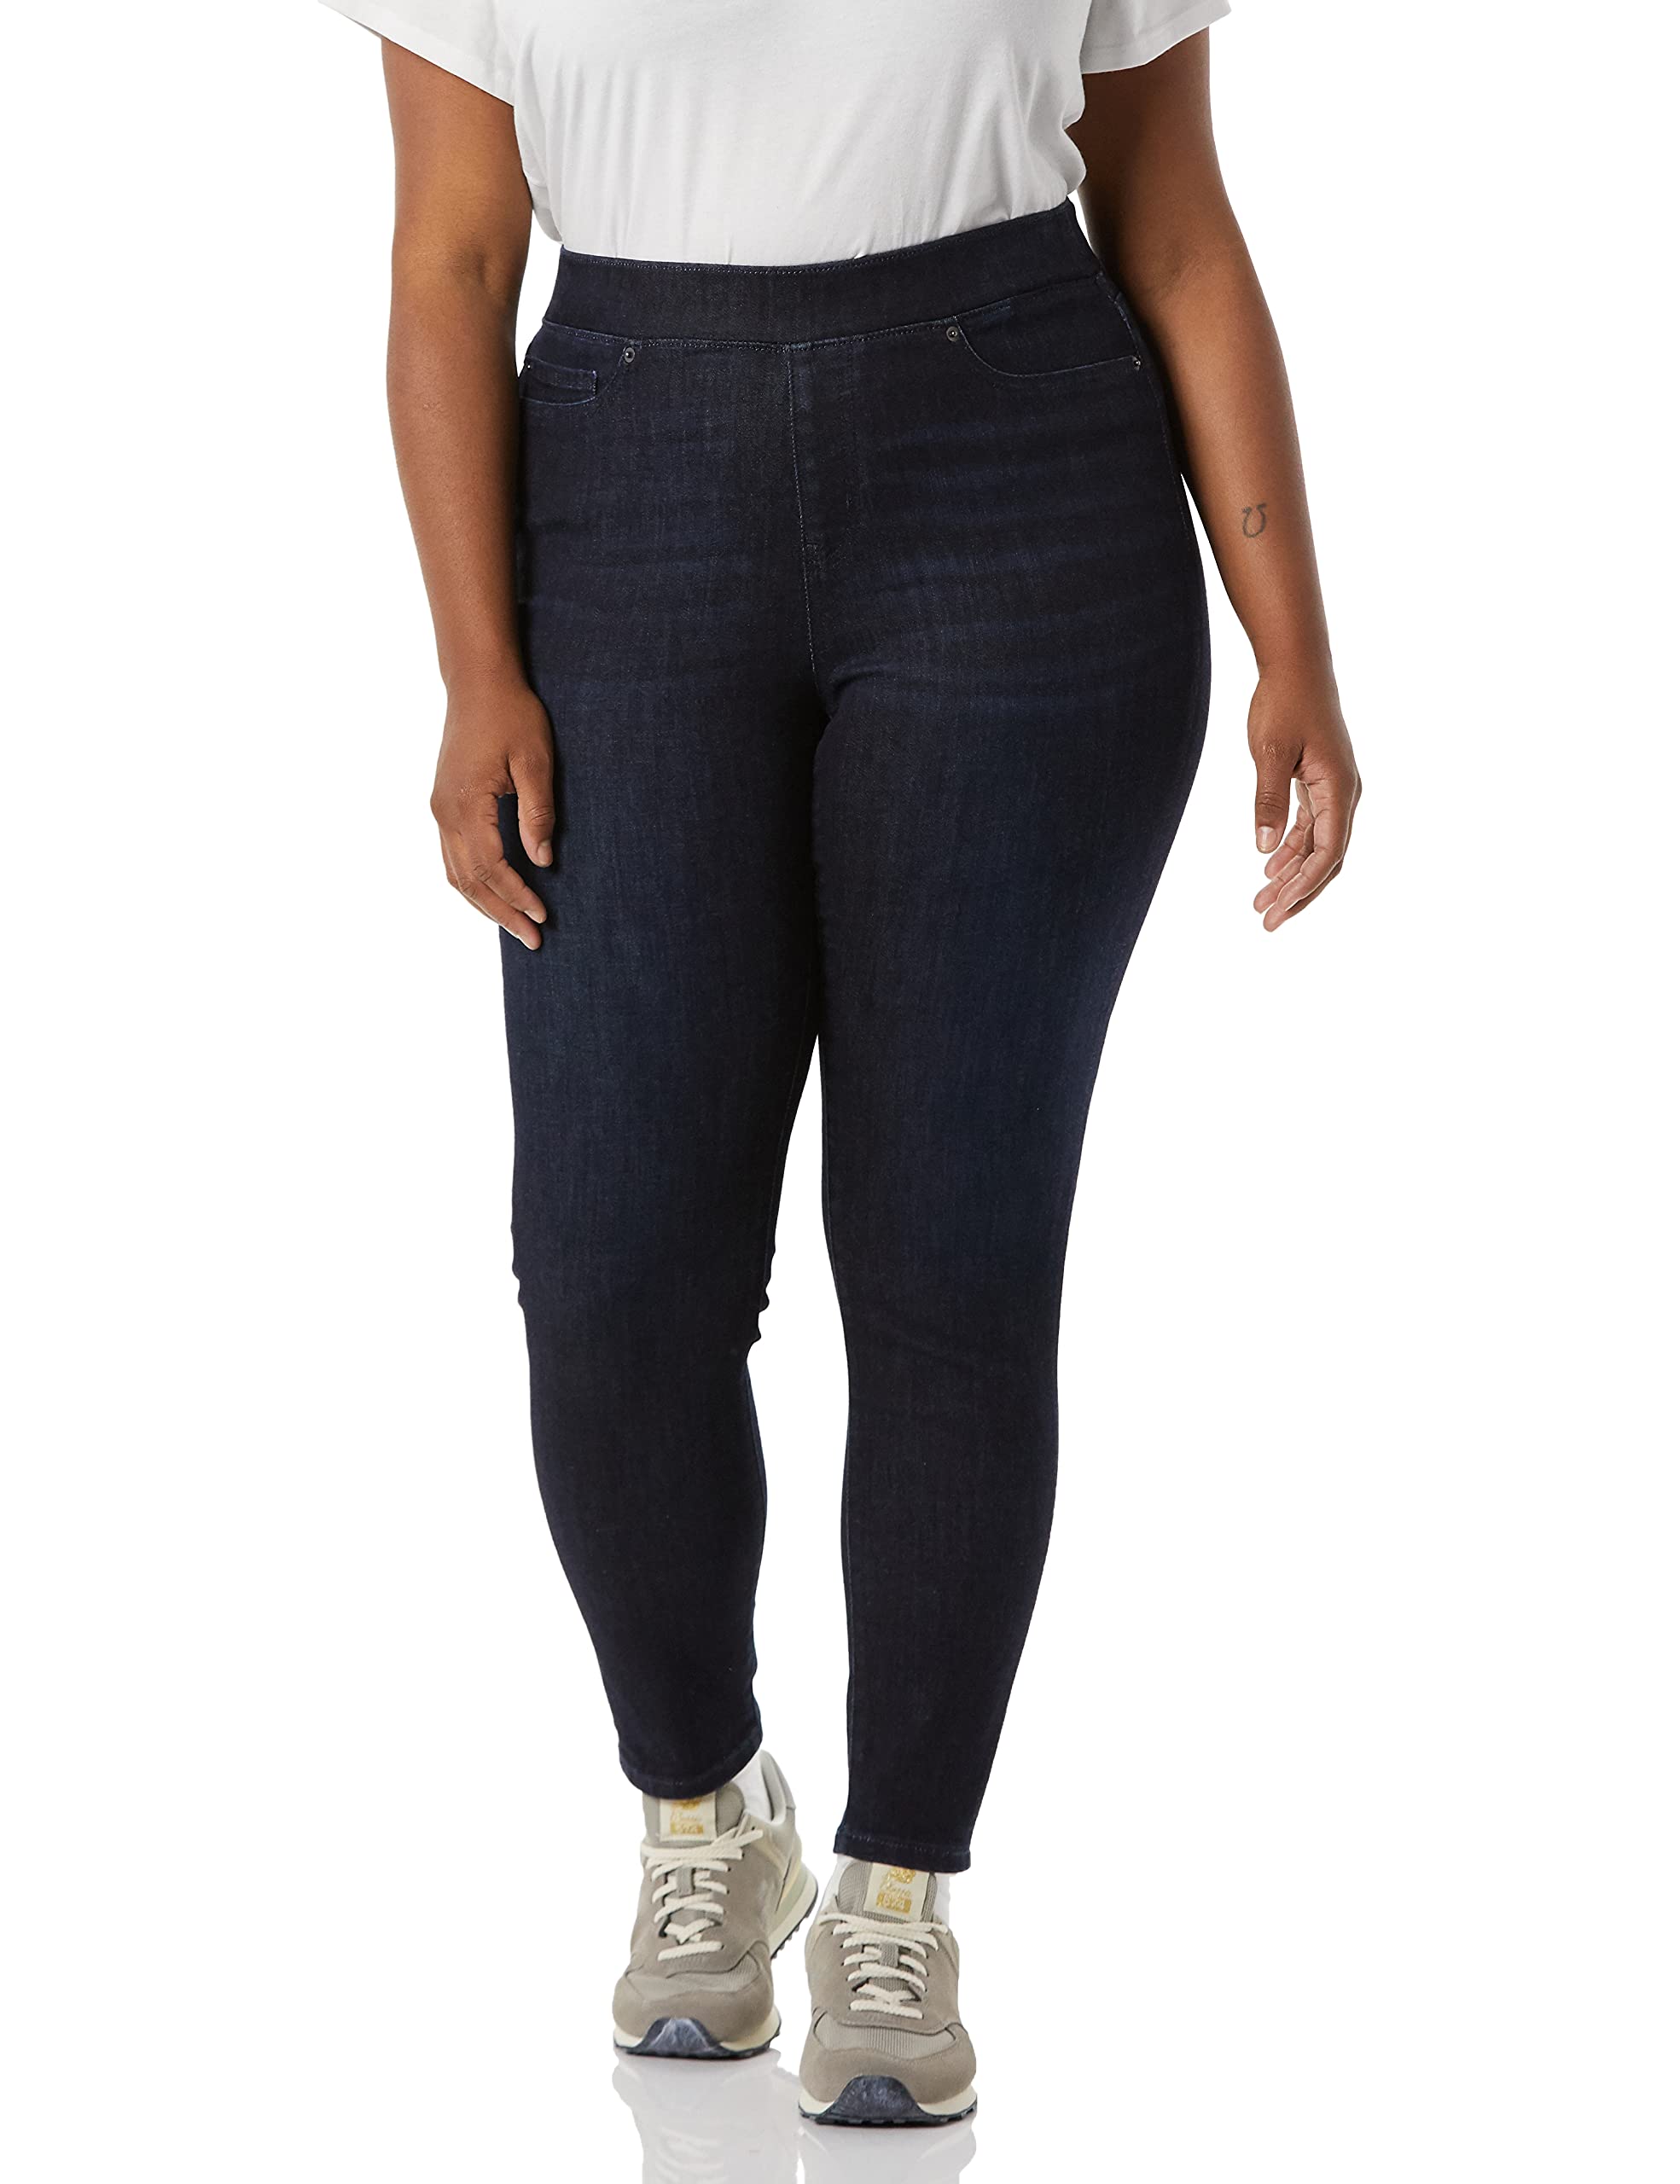 Amazon Essentials Women's Stretch Pull-On Jegging (Available in Plus Size)